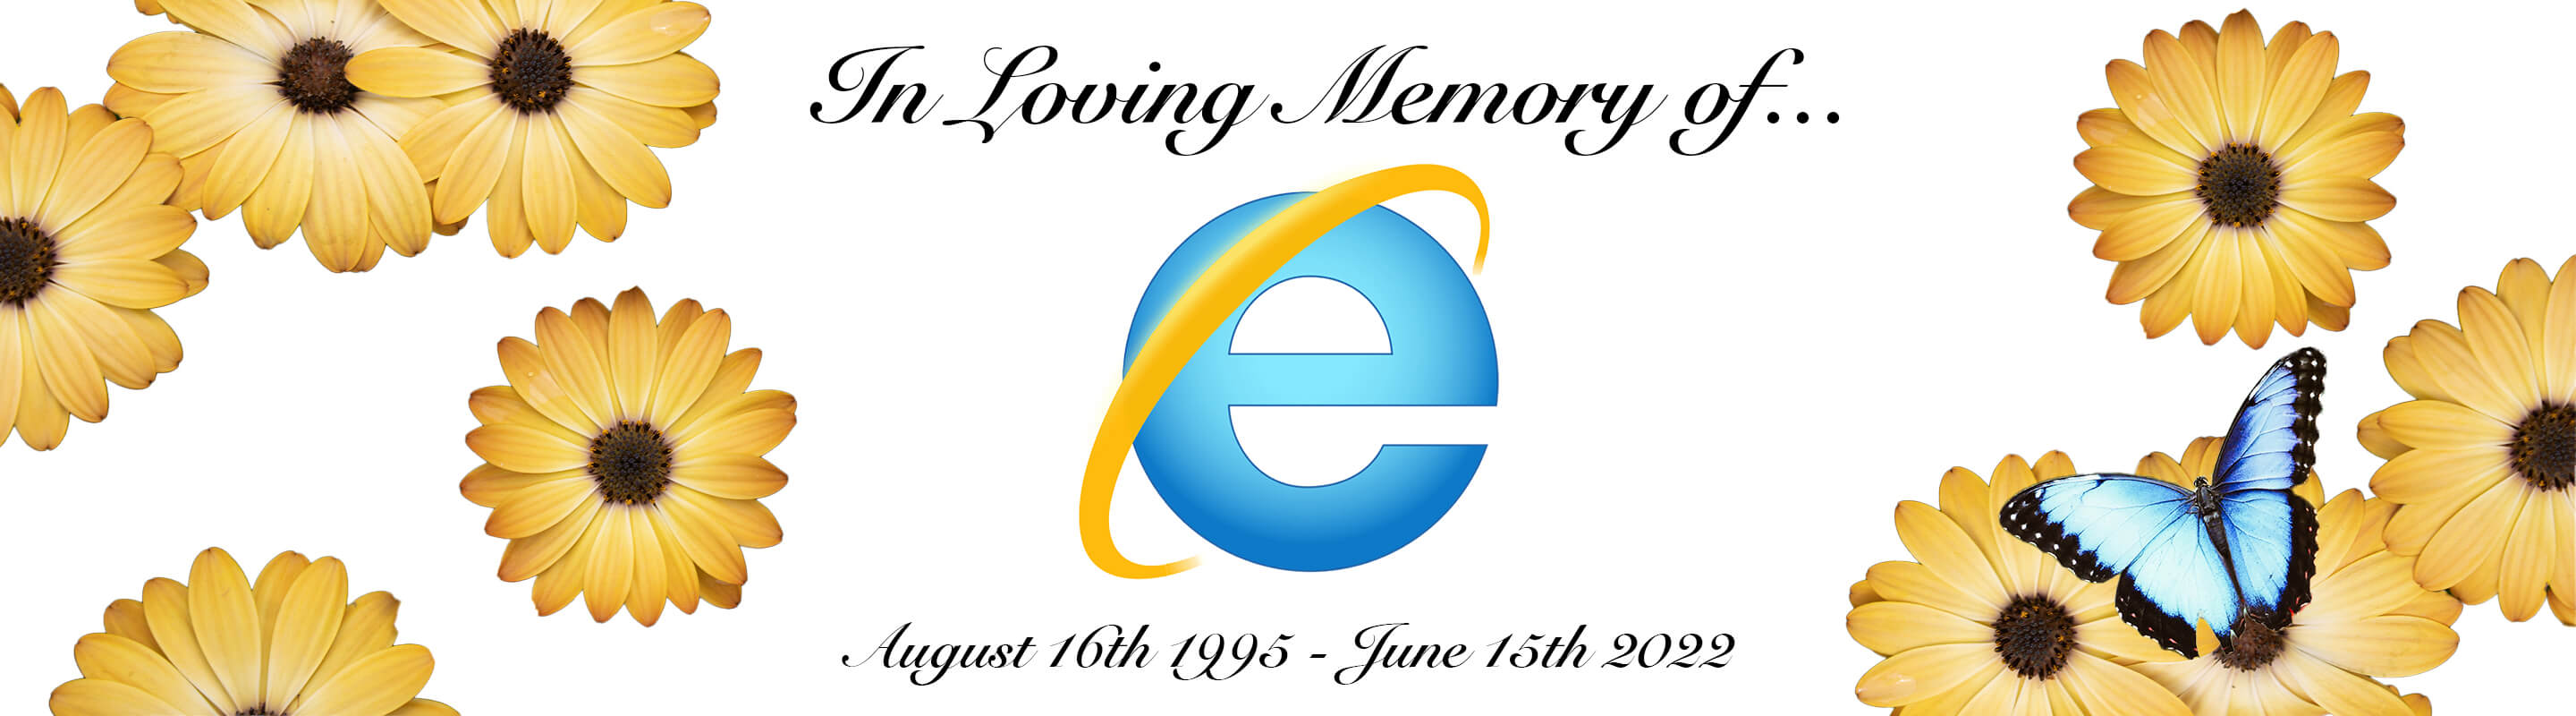 The End of Internet Explorer's Life